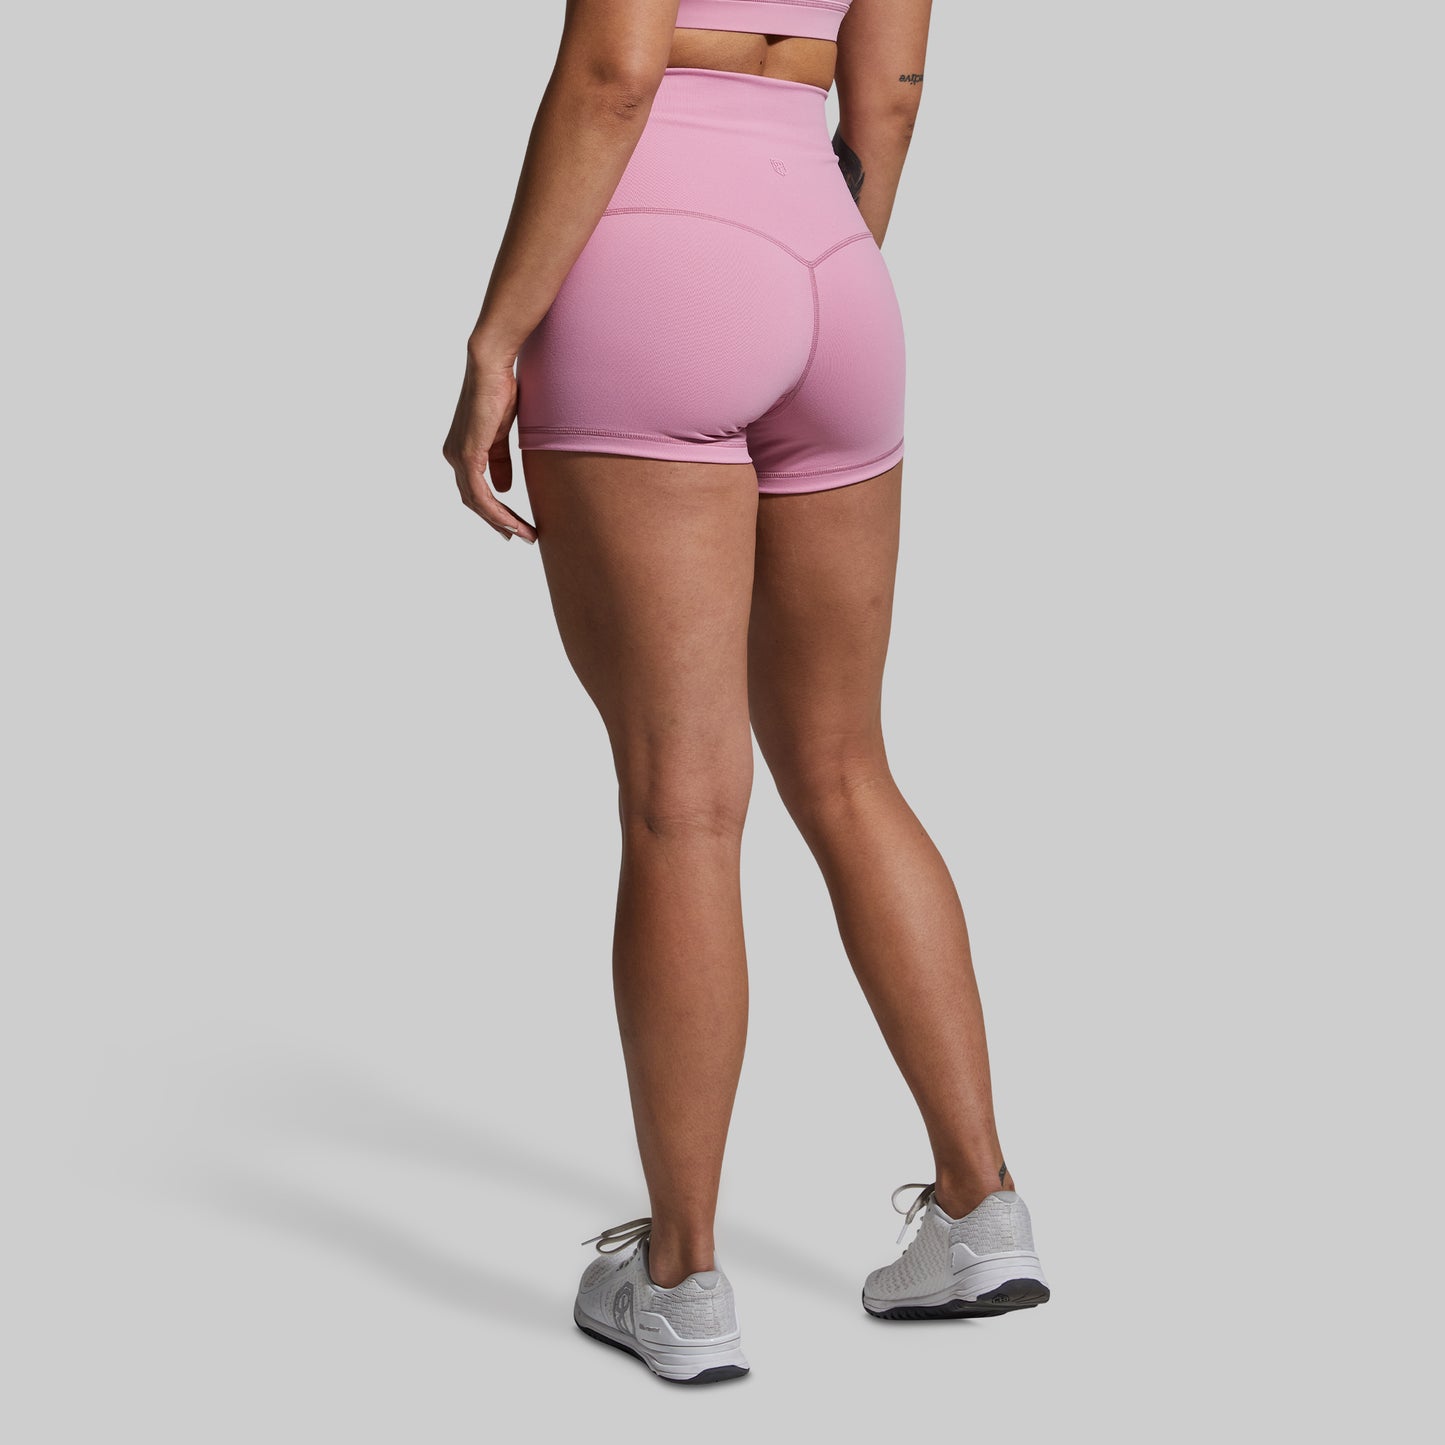 Born Primitive - New Heights Booty Short (Orchid)